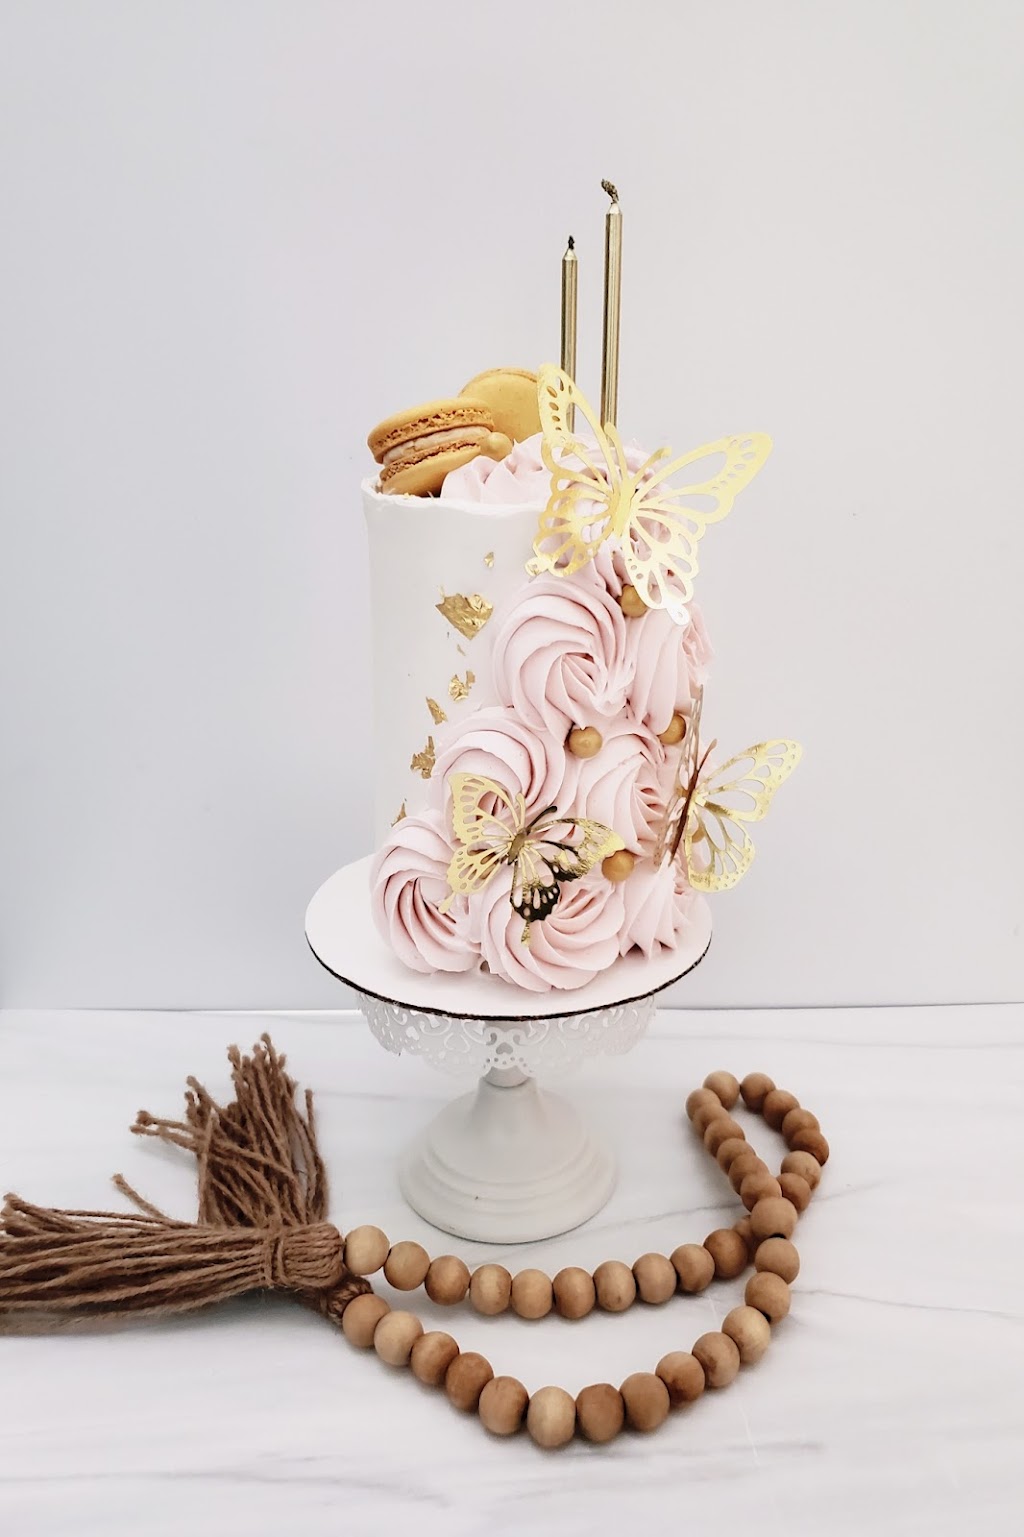 Sweet Luxe Cake Design | By Appointment Only, Blairstown, NJ 07825 | Phone: (973) 897-3595